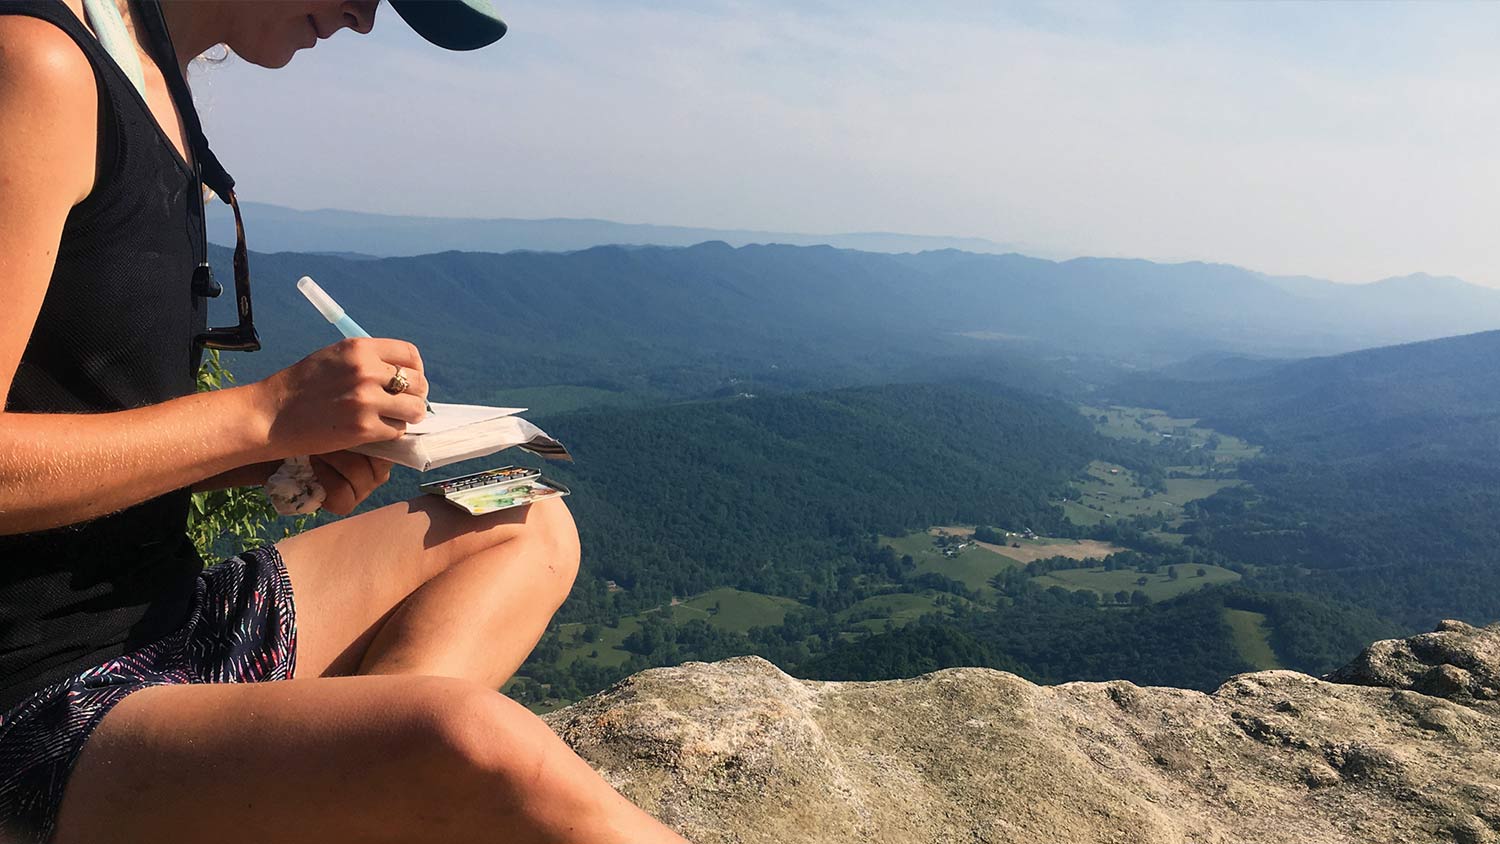 A rare moment to paint directly from the landscape atop McAfee Knob